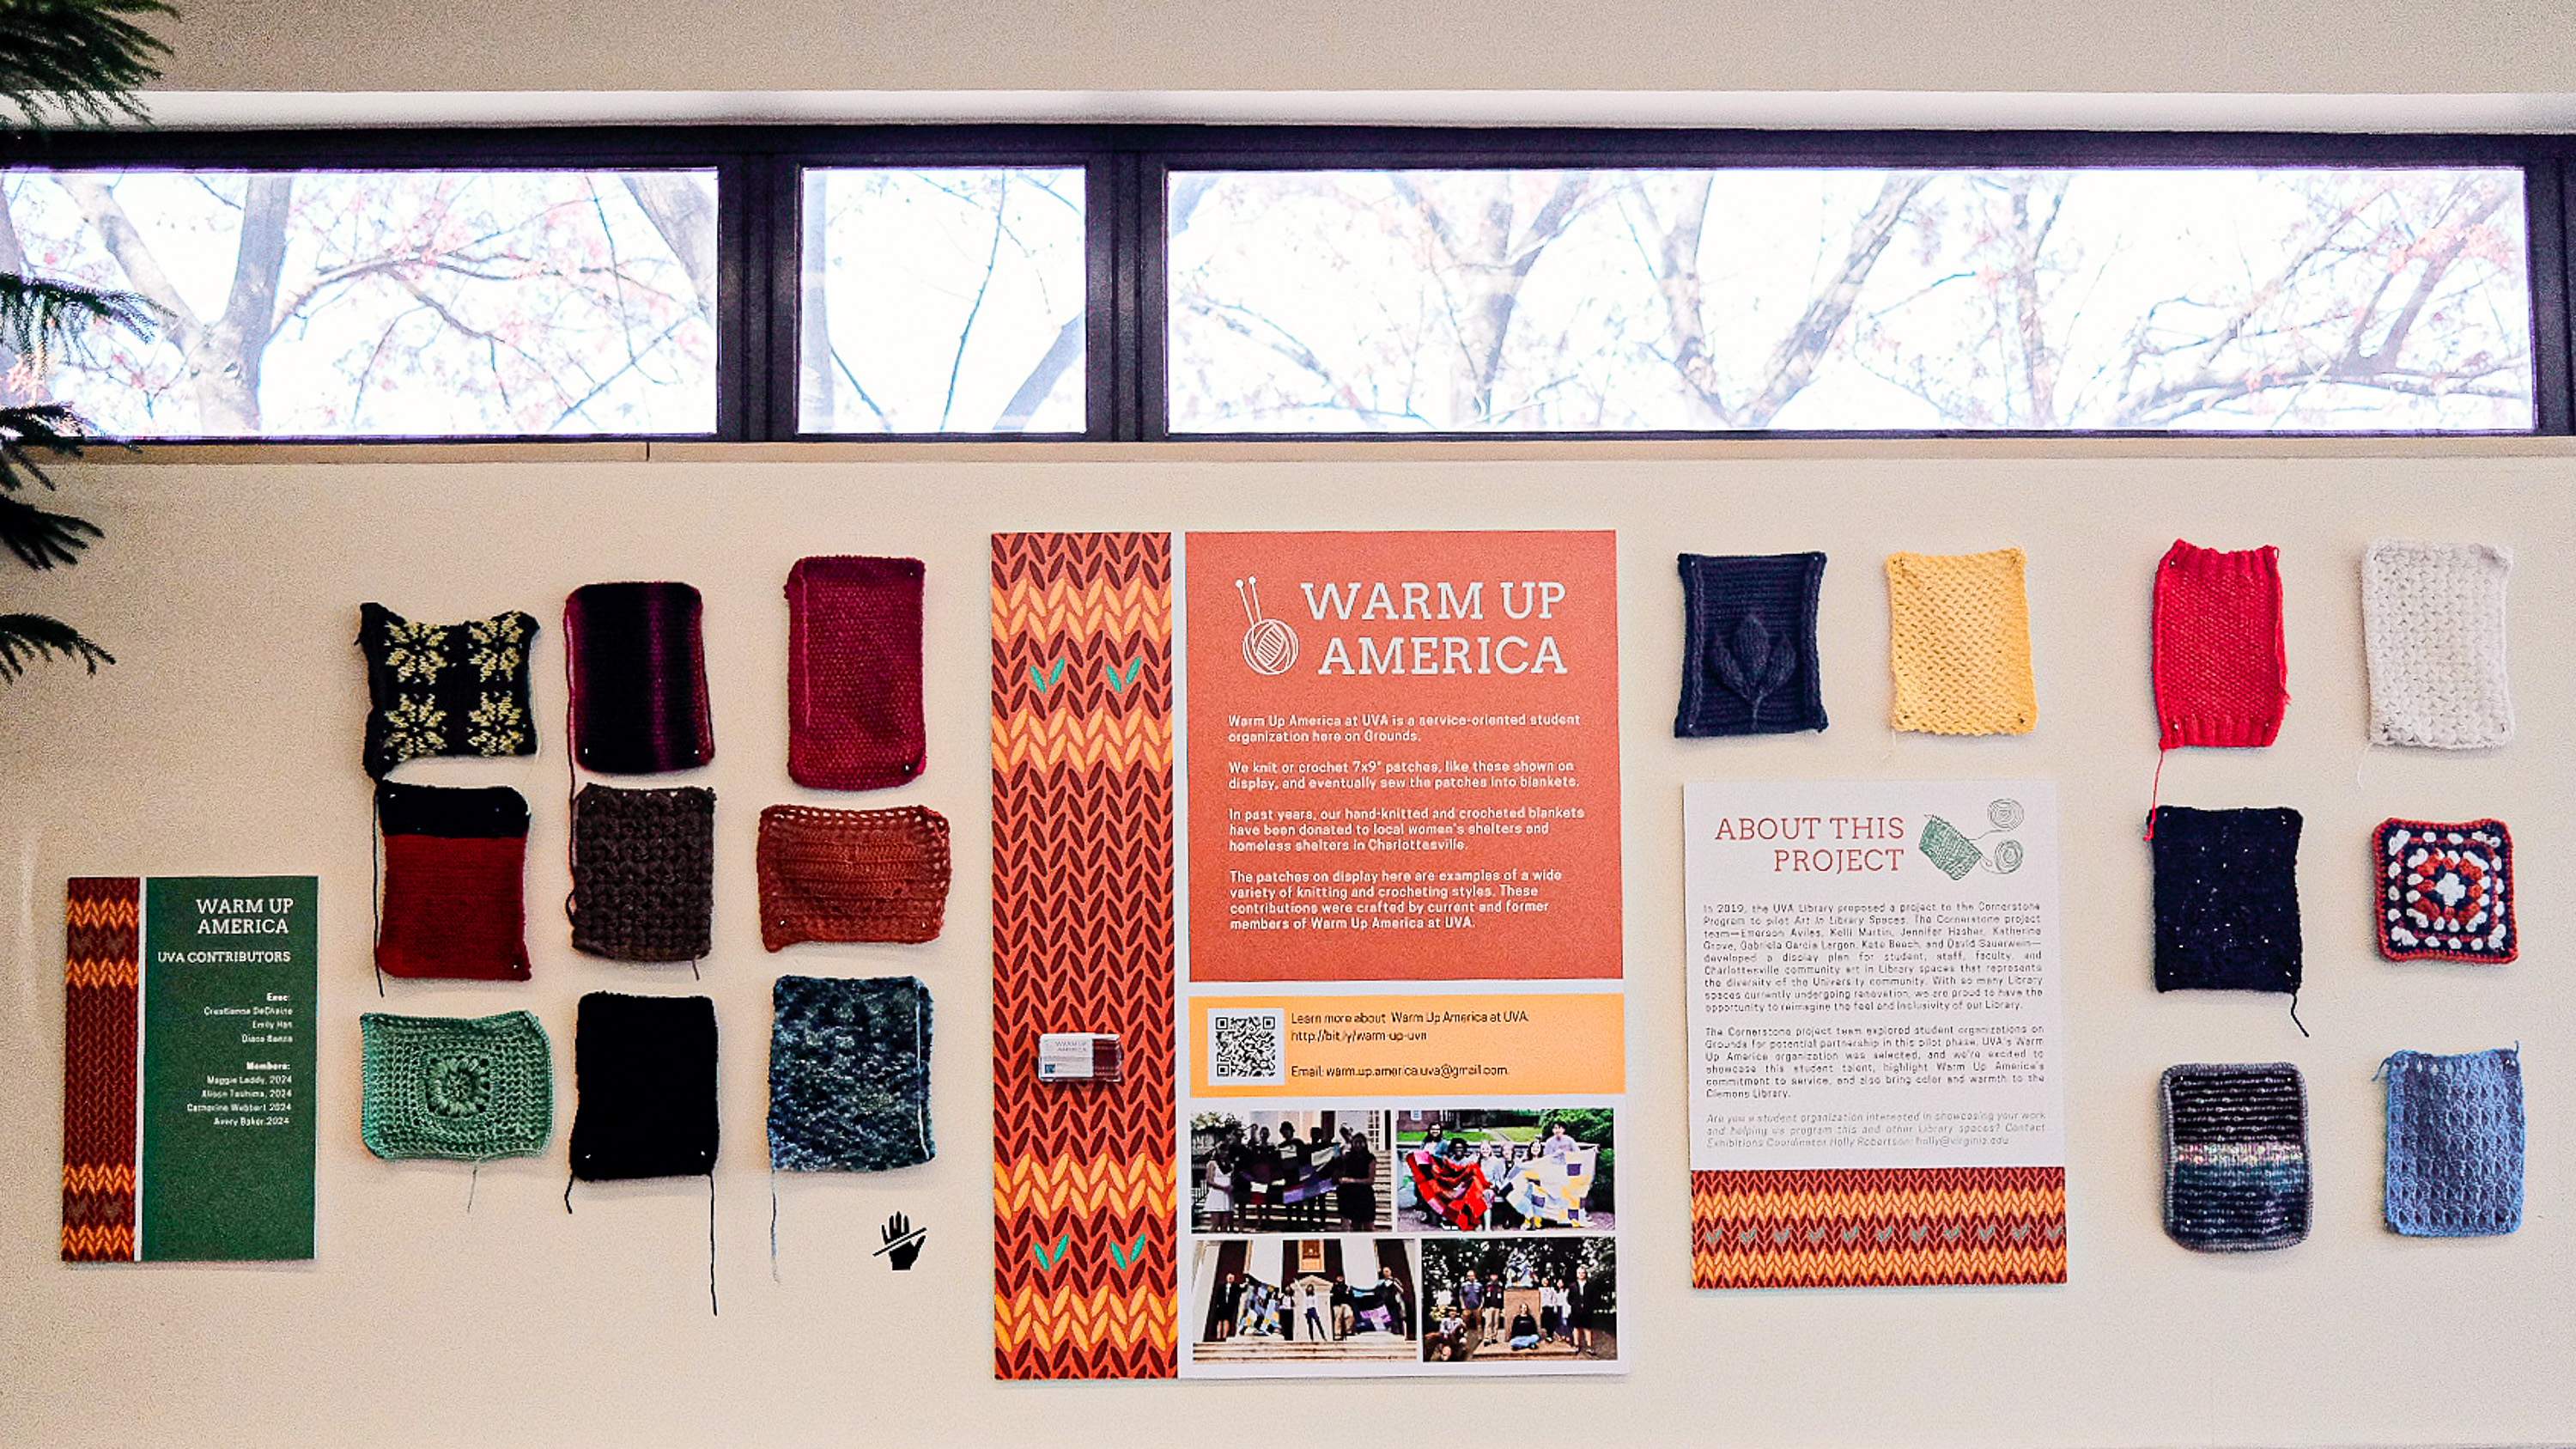 Gallery installation of knit and crochet squares by student organization Warm Up America